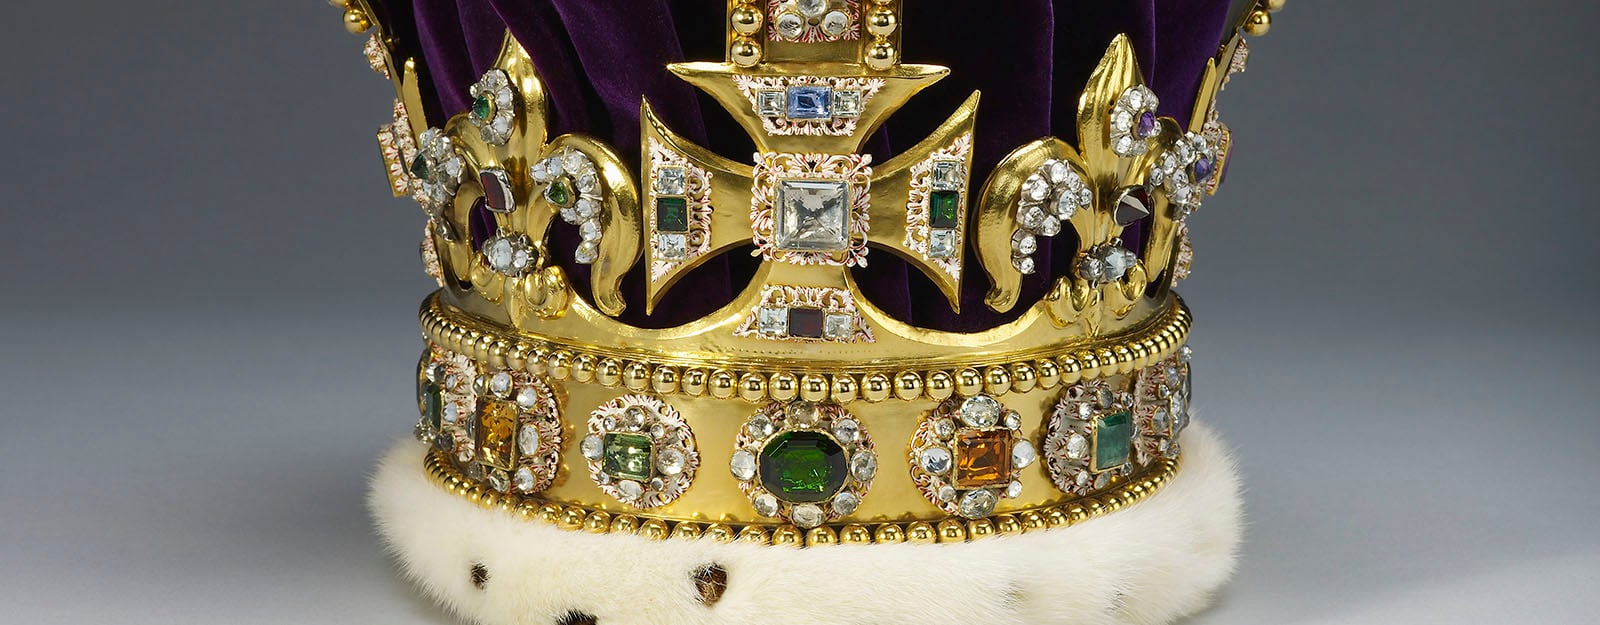 A close up of a gold crown set with jewels